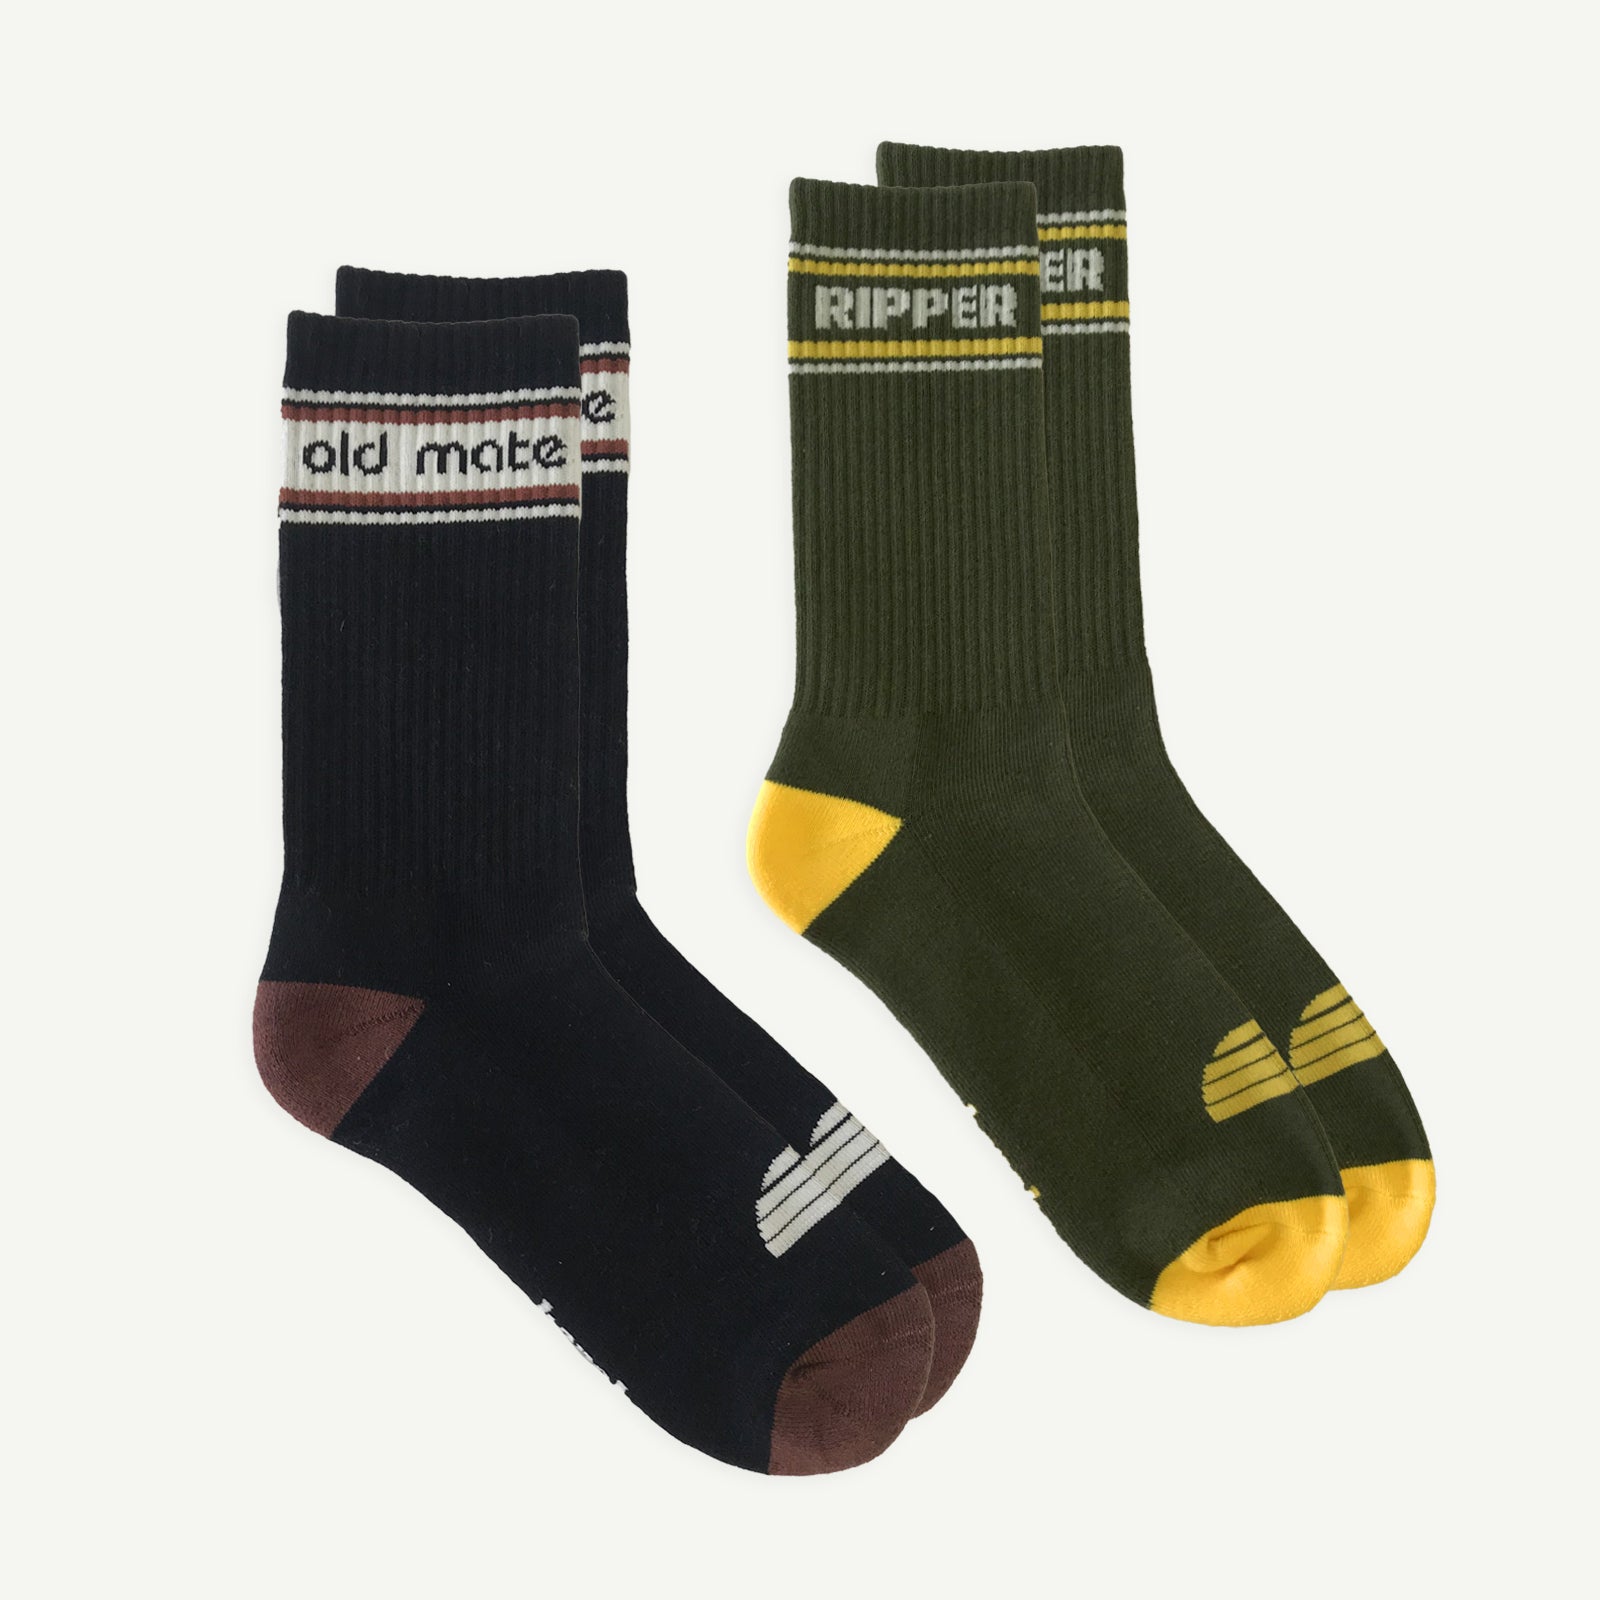 Old Mate and Ripper Organic Cotton Crew Sock Adult Pack